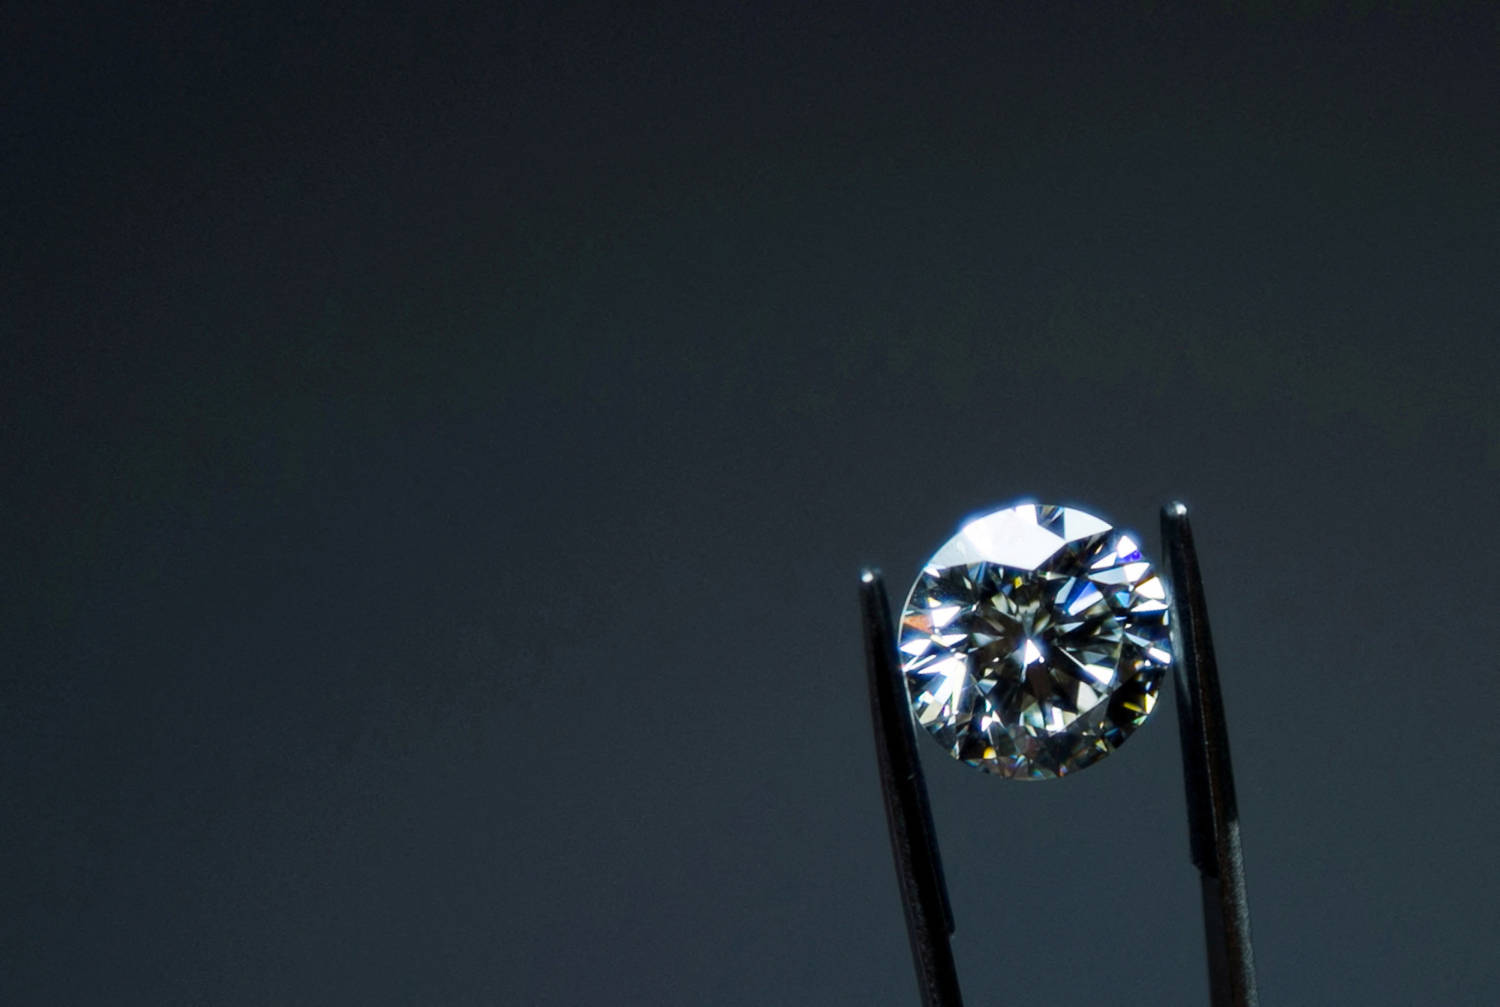 File Photo: A Diamond Is Displayed At The Certification Level At The Hrd Antwerp Institute Of Gemmology At The Antwerp World Diamond Centre